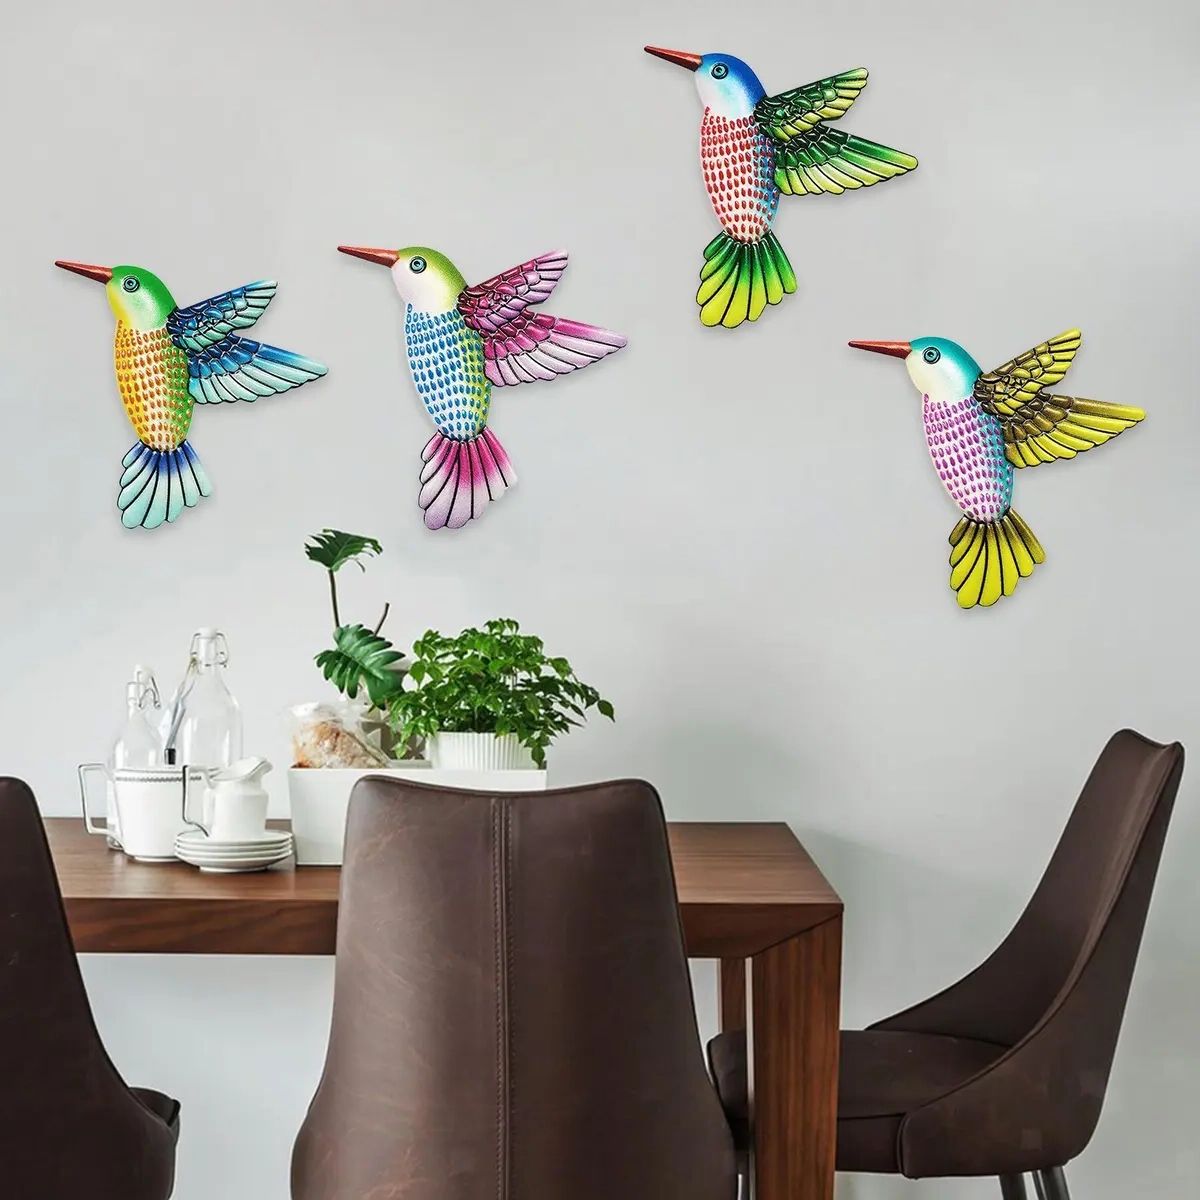 4x Hummingbird Wall Art Decor Sculpture Hanging For Lawn Patio Balcony  Outdoor (View 14 of 15)